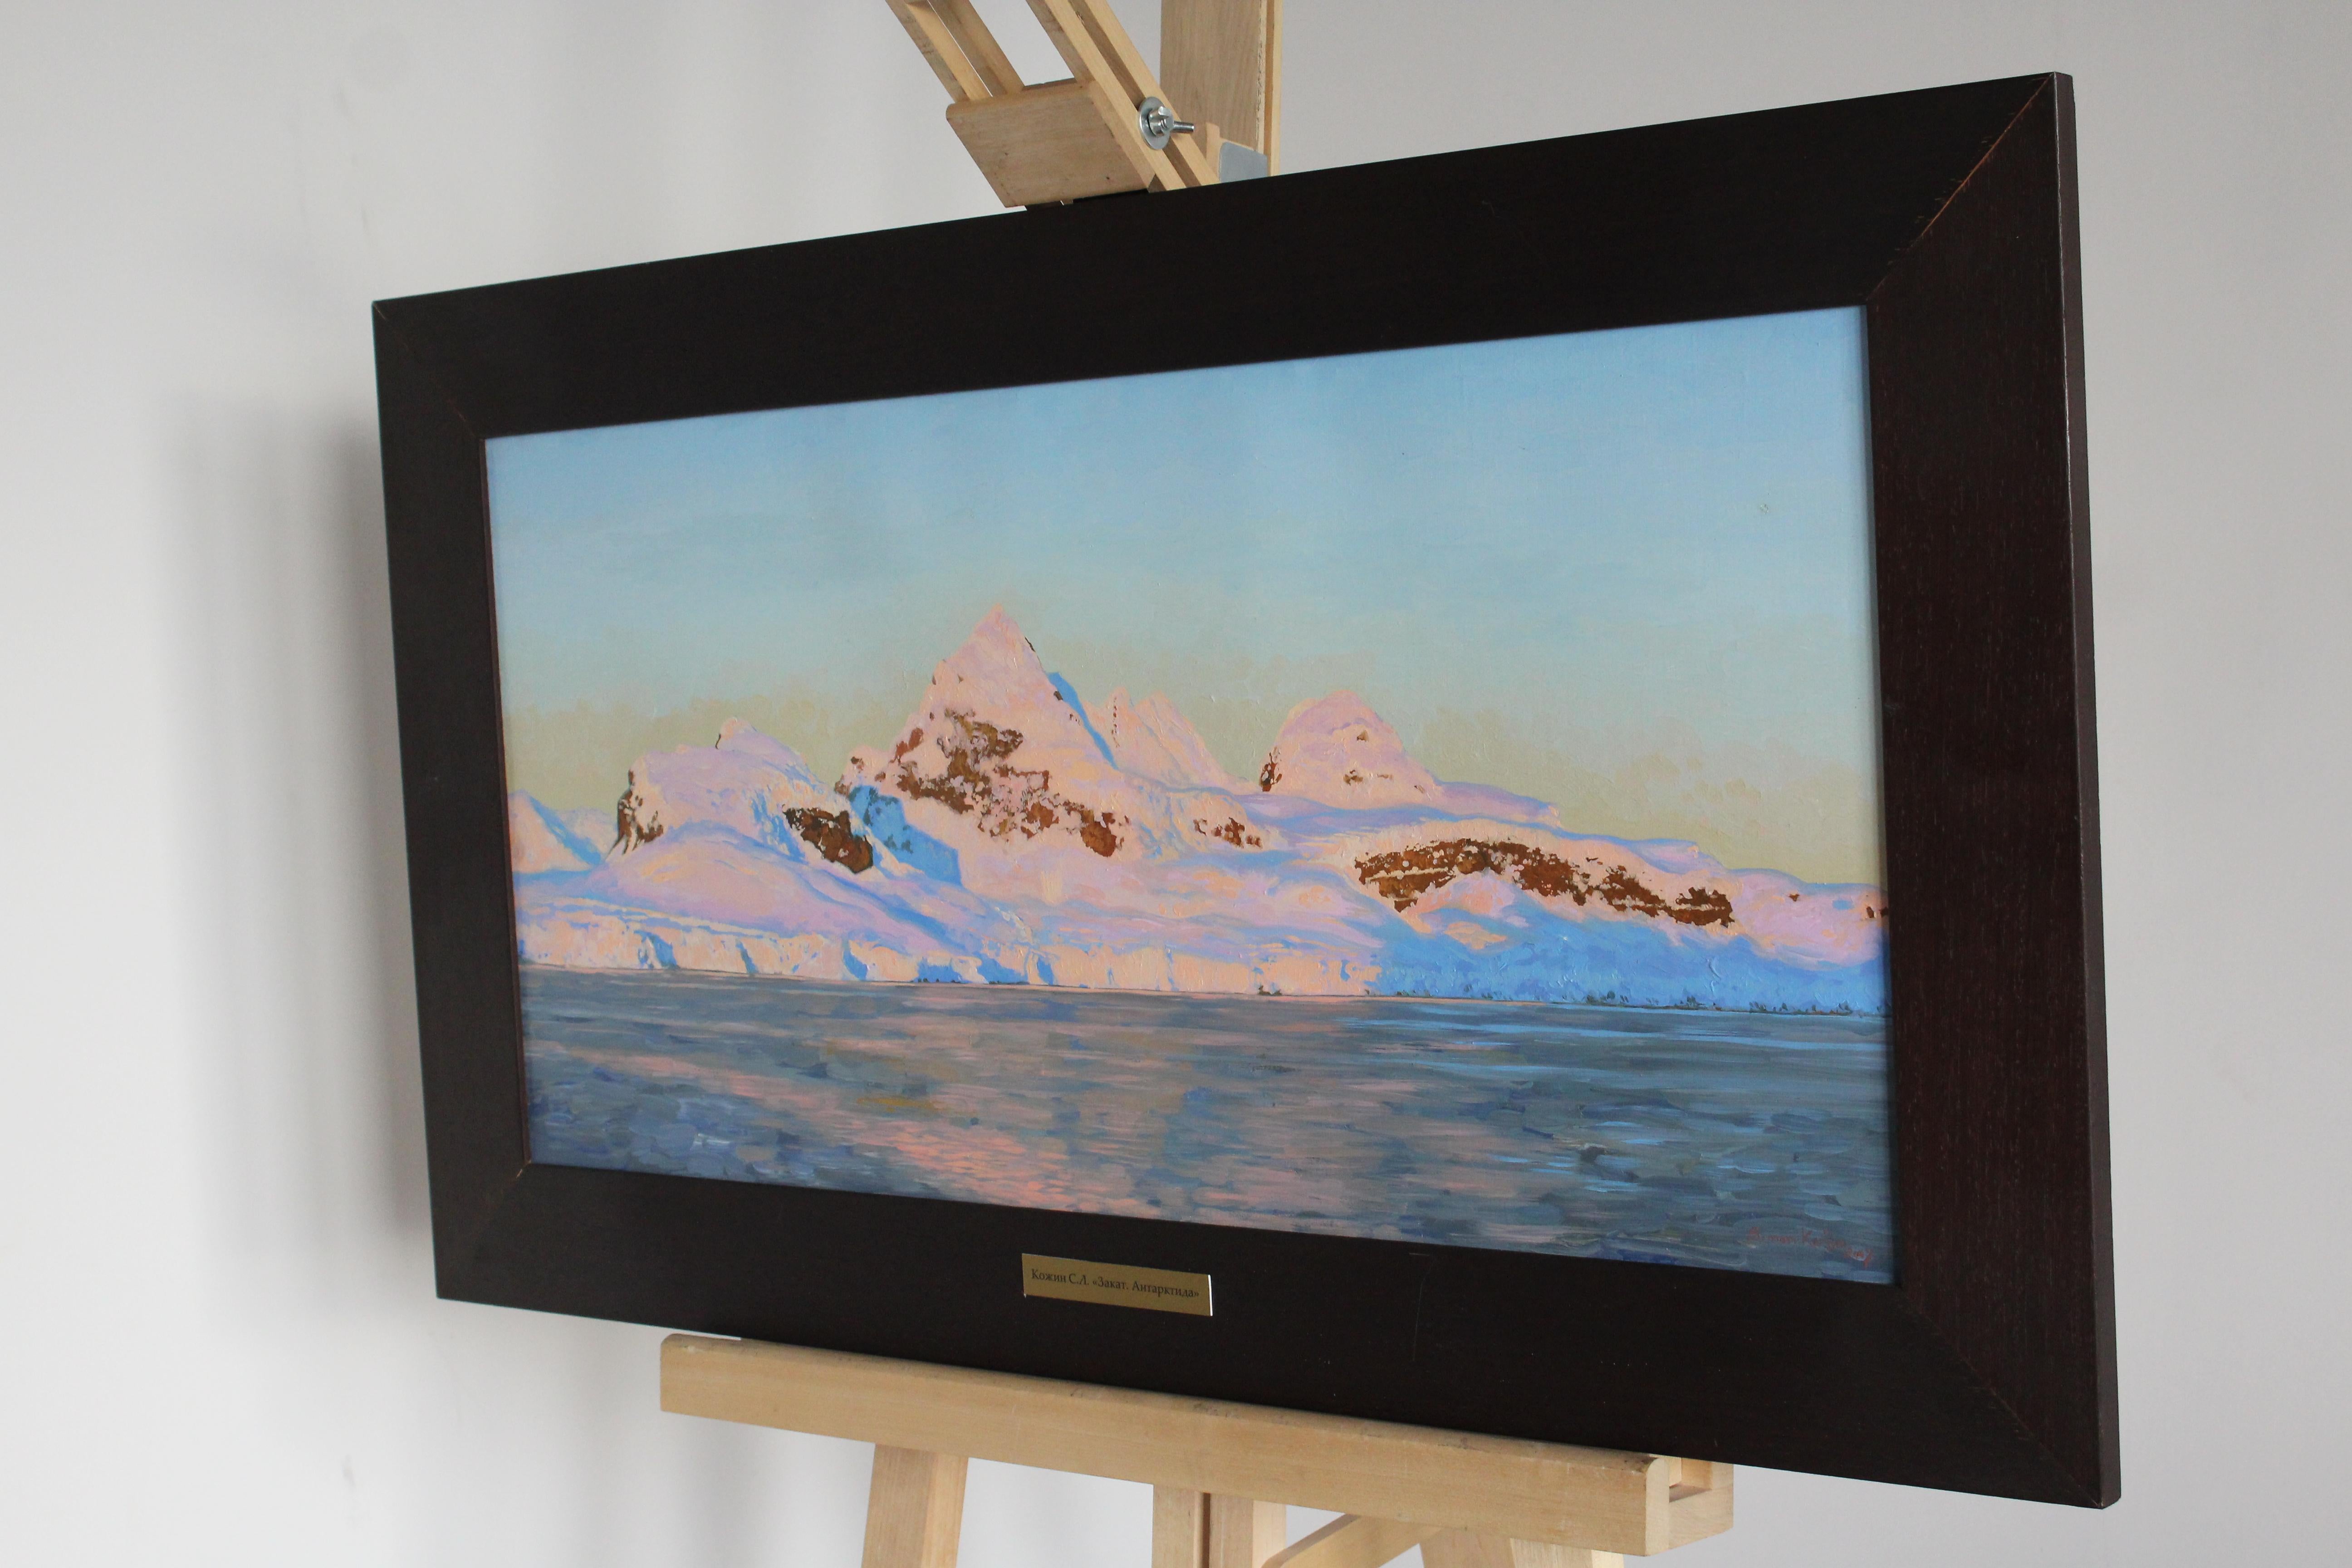 Antarctic sunset is an ongoing winter day with gusts of wind off the coast. Ice blocks with snow with a huge variety of shades and colors.
Provenance:
2007 - 2016 Private collection.
Exhibition:
2016 The personal exhibition 